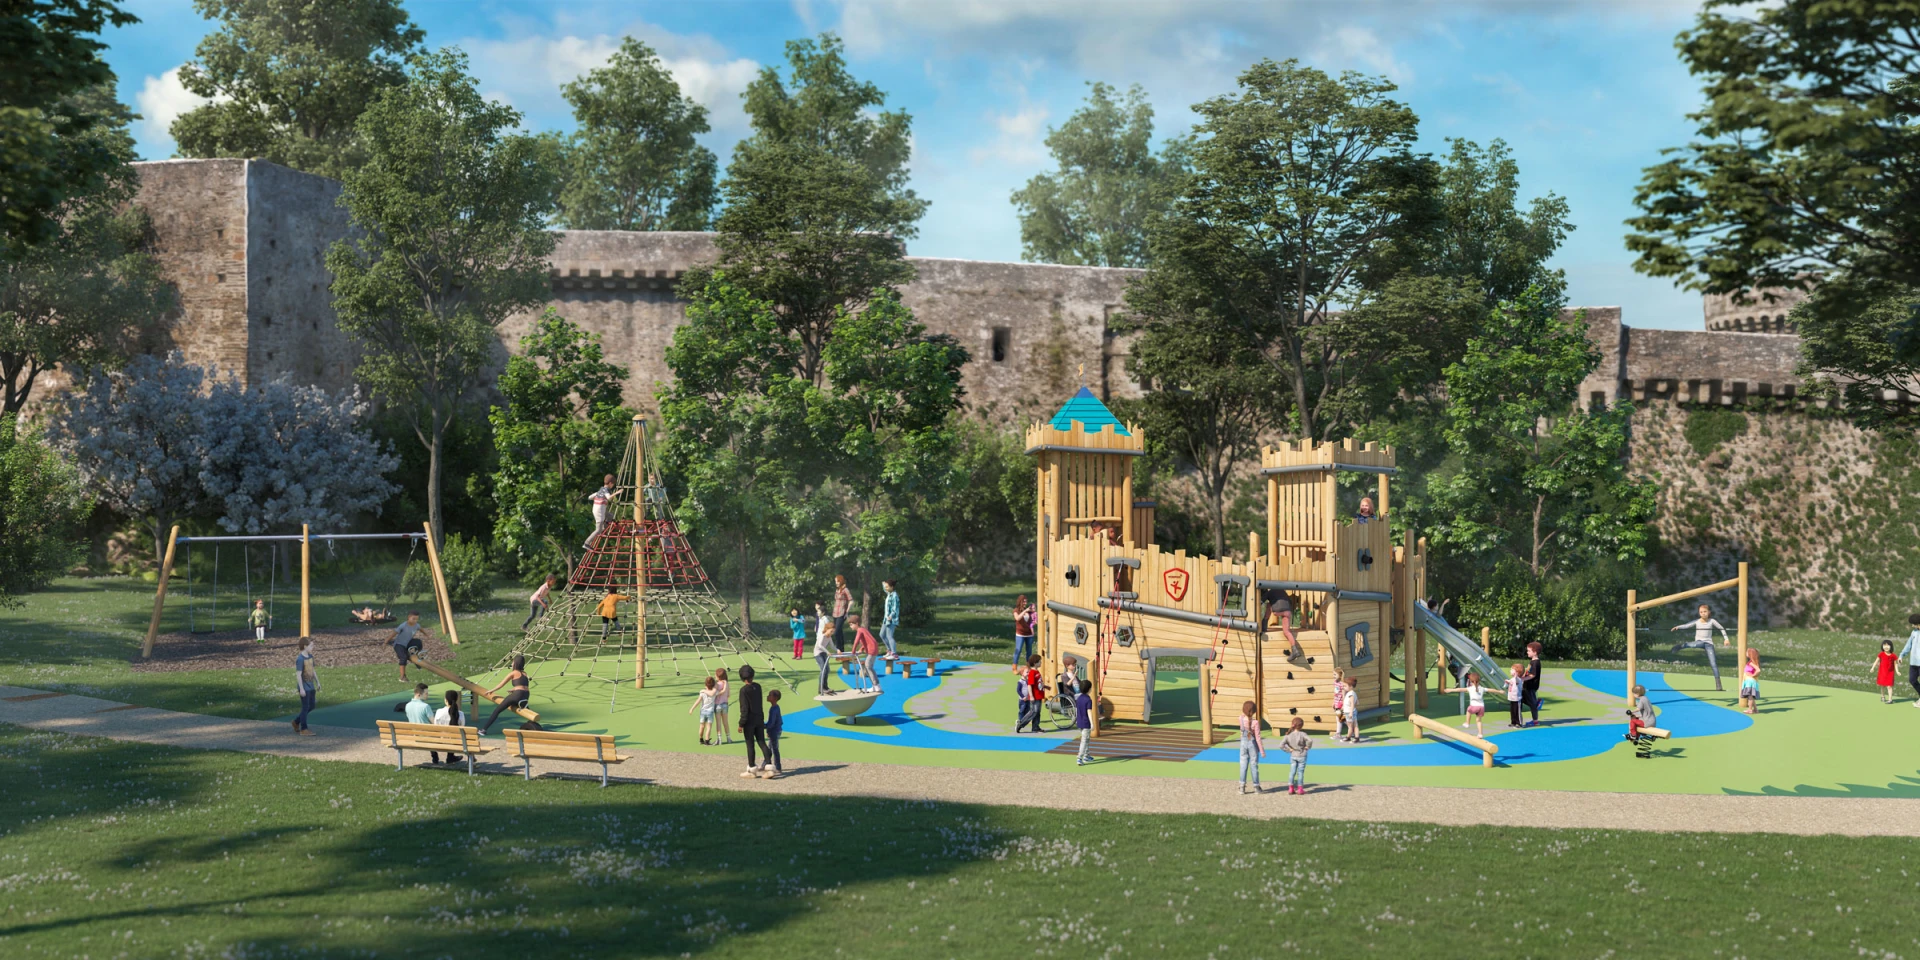 A playground design idea of a wooden castle in a park